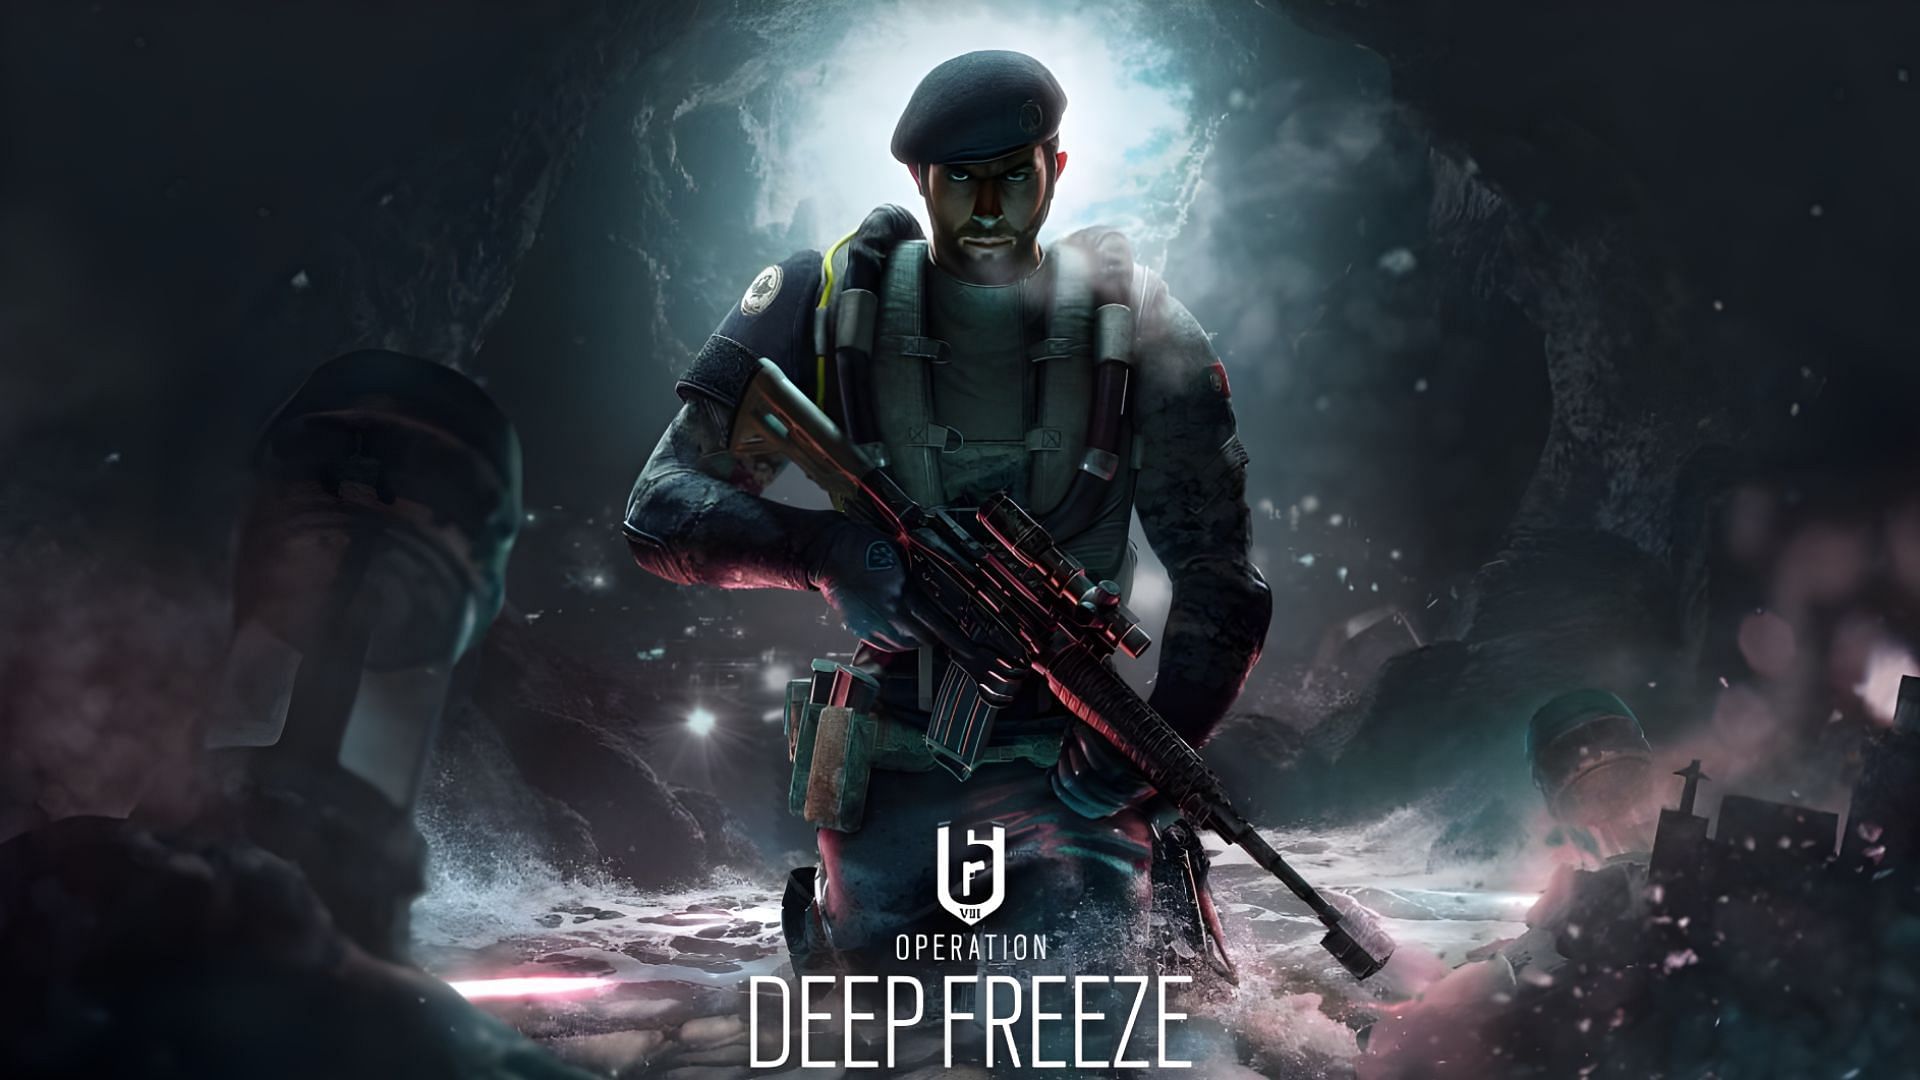 Rainbow Six Siege Operation Deep Freeze releases today